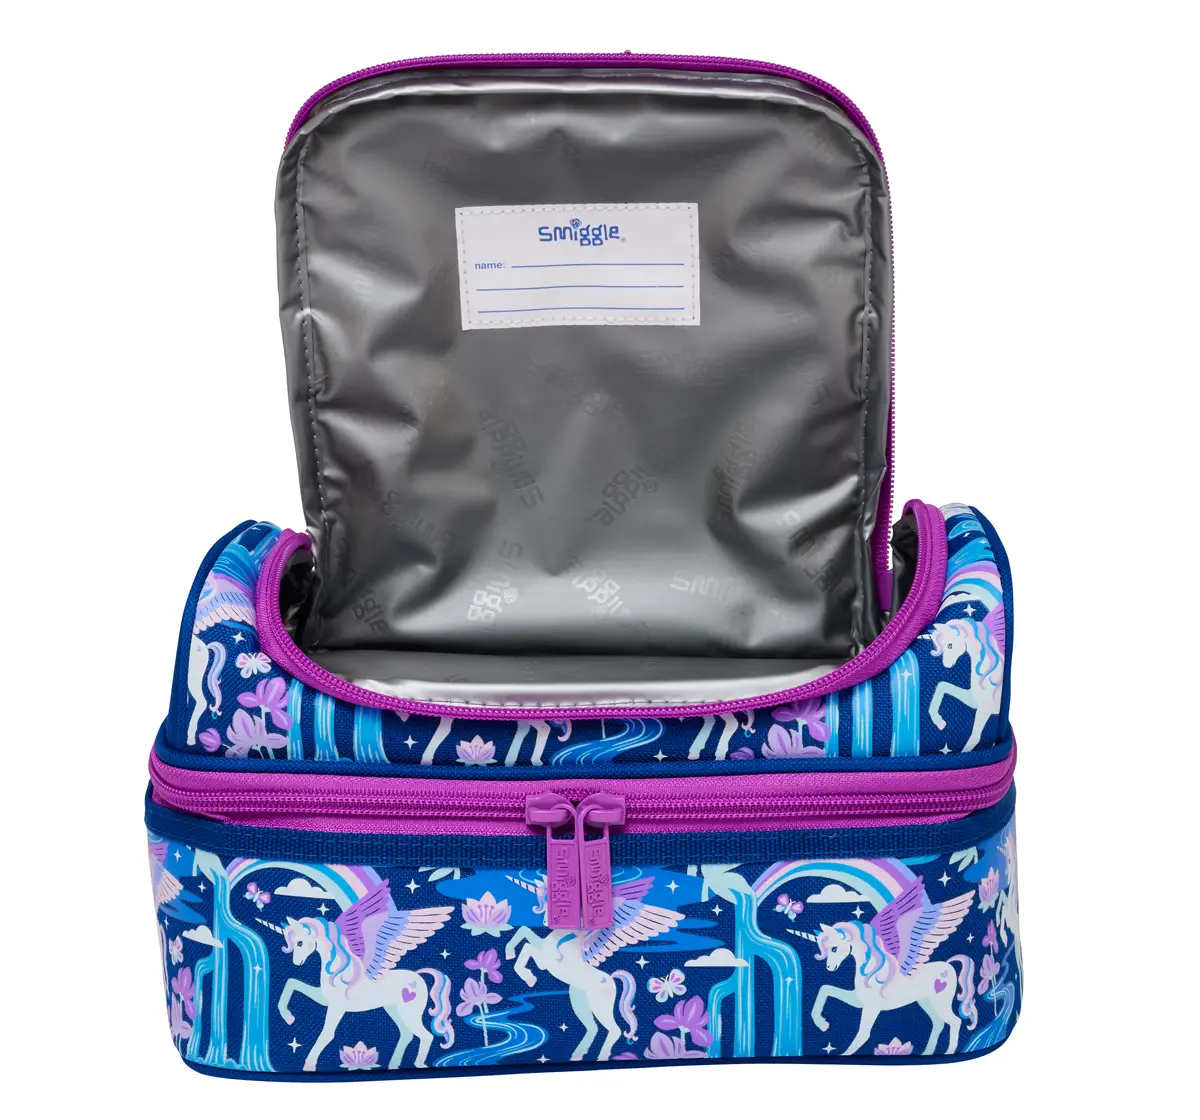 Lunch Bag Smiggle Unboxing - YouTube